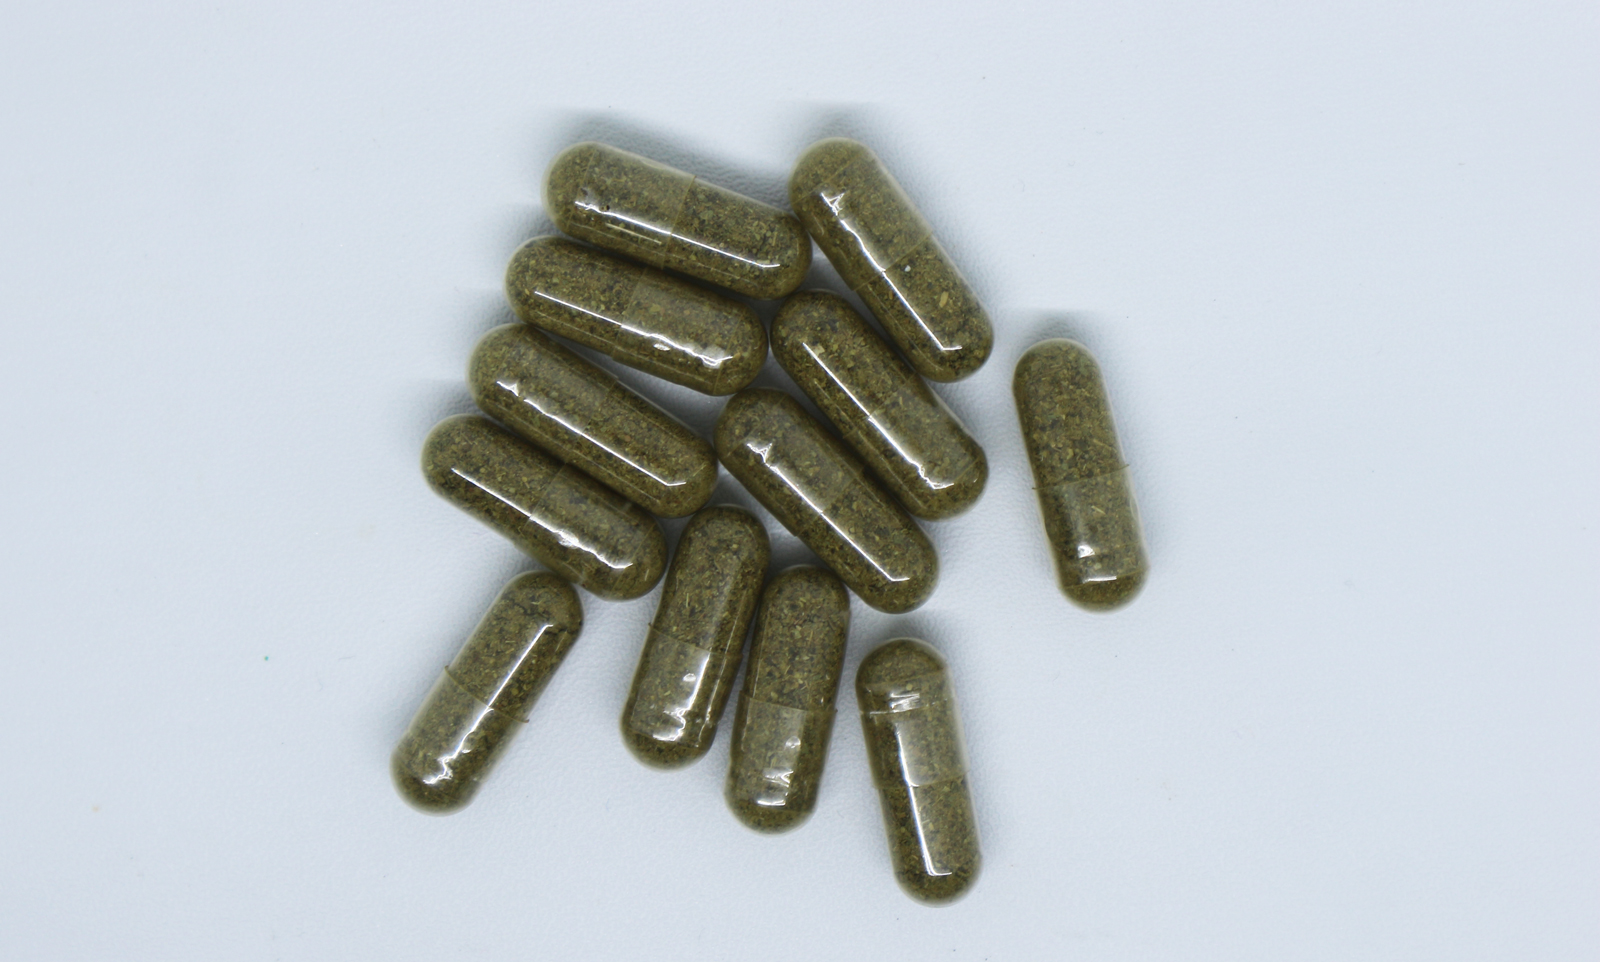 Quality of herbal Weight Loss Supplements (WLS): composition, safety and antioxidant capacity